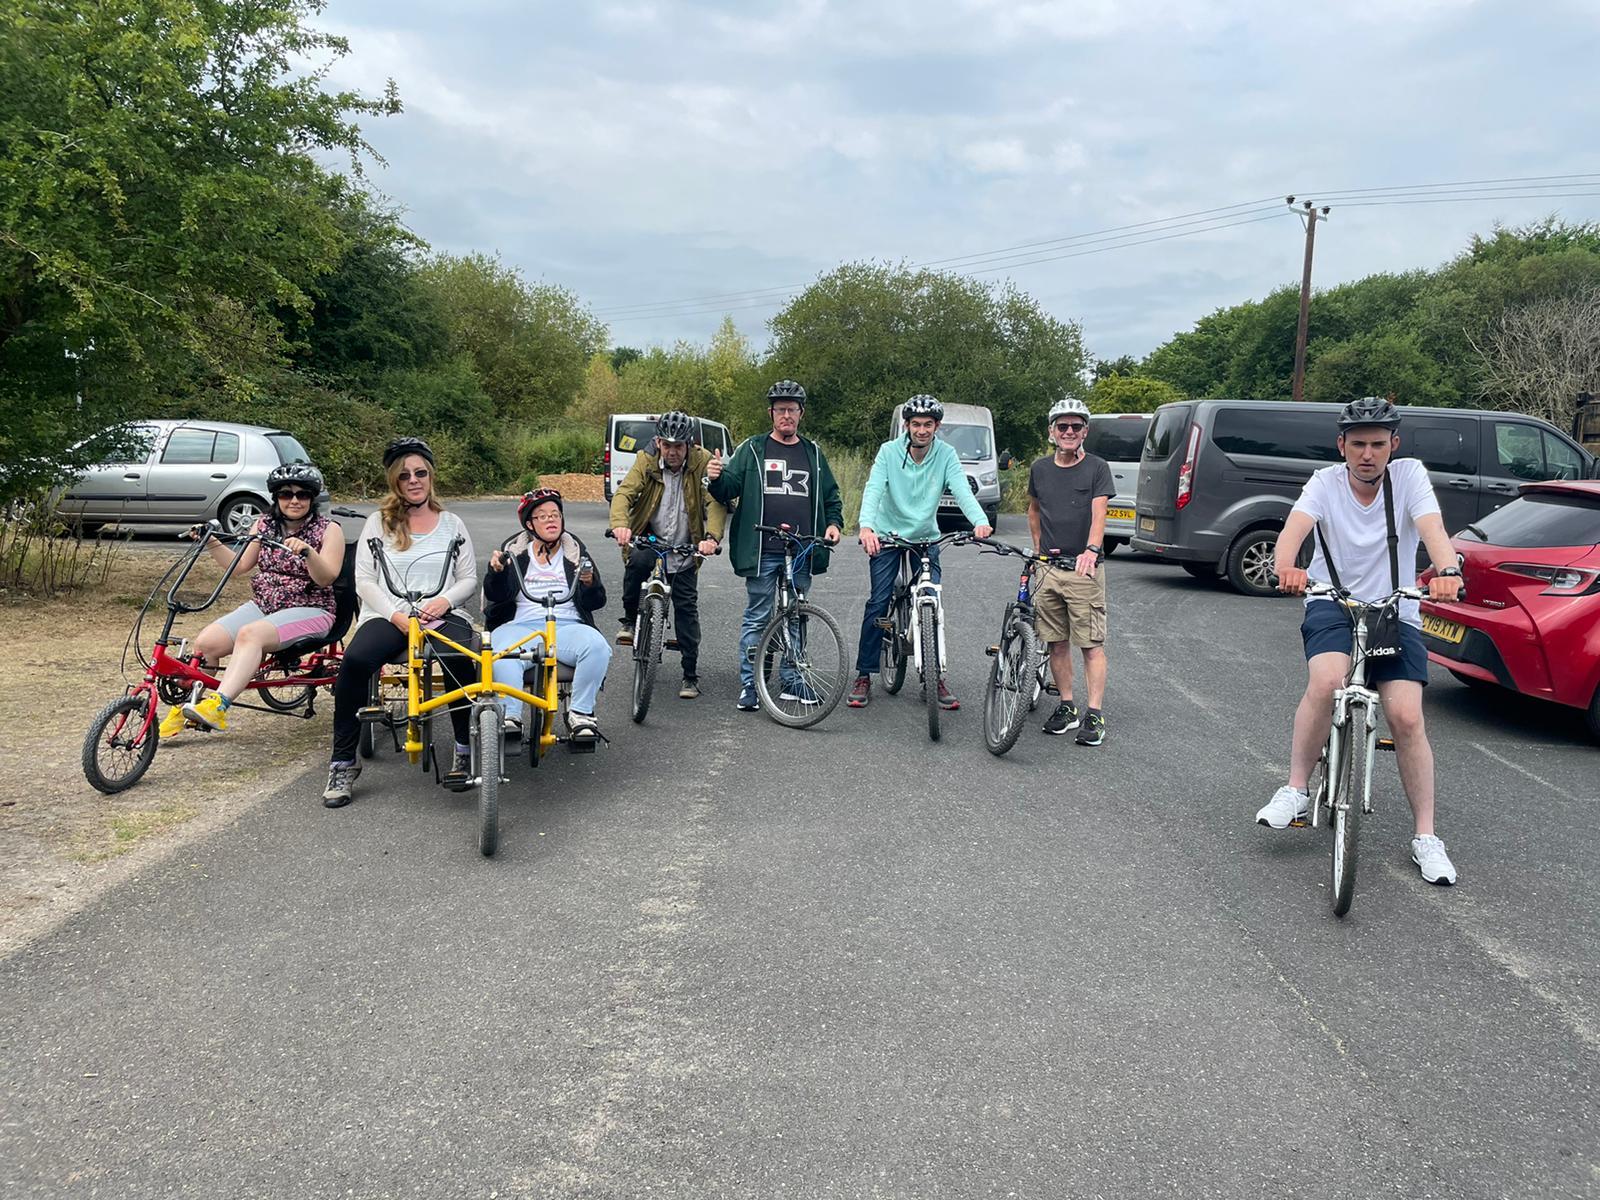 A group ride at Pedal Power.